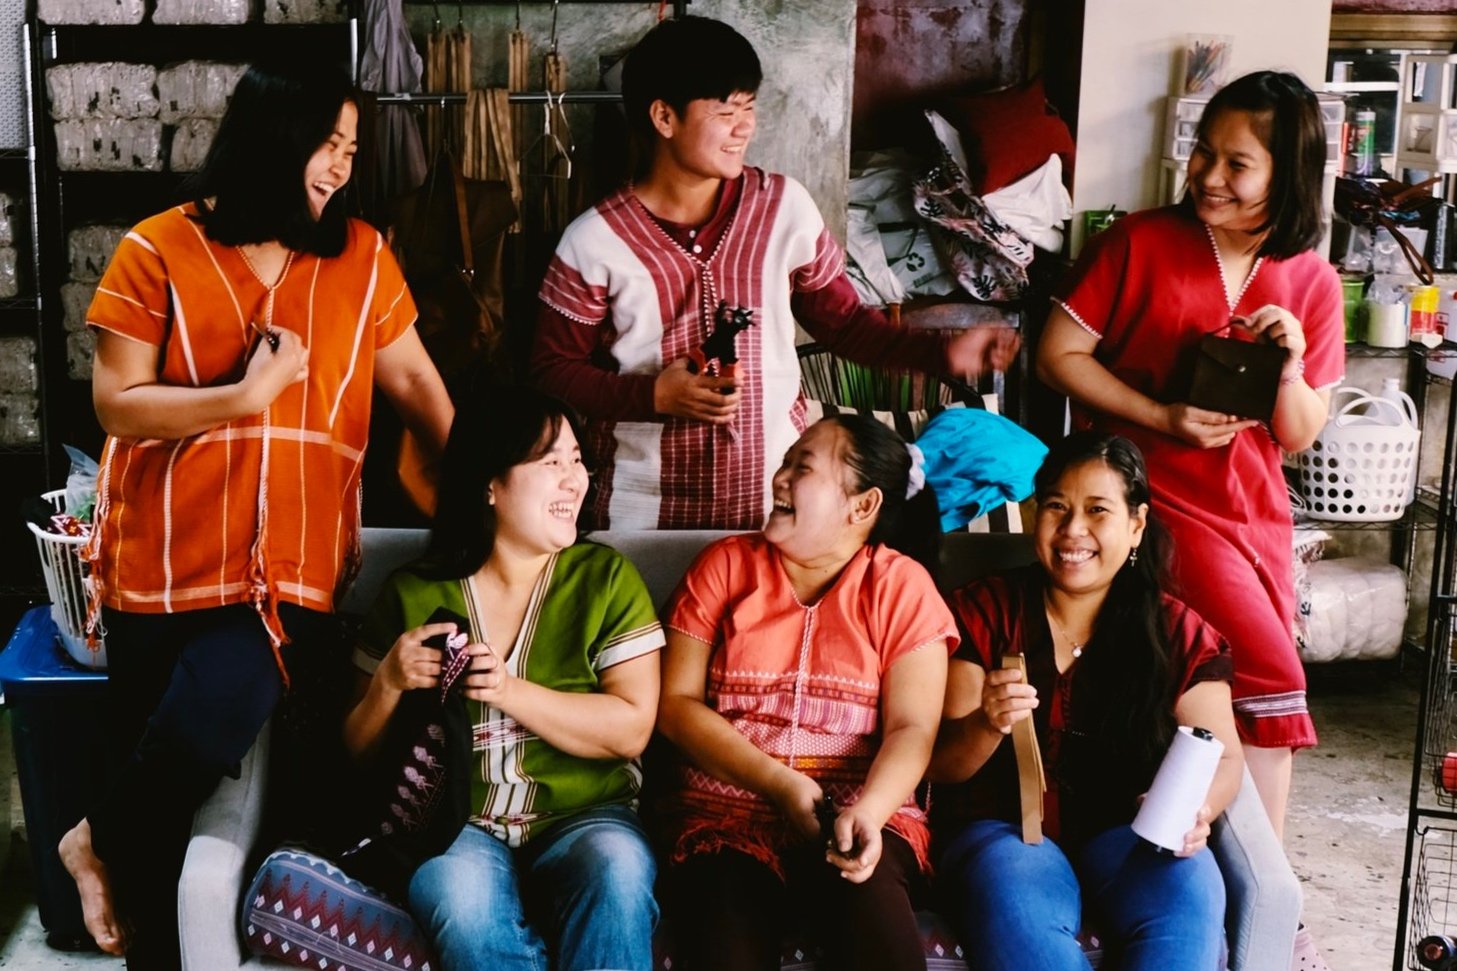 The women of Braverly, a not for profit organization in Thailand